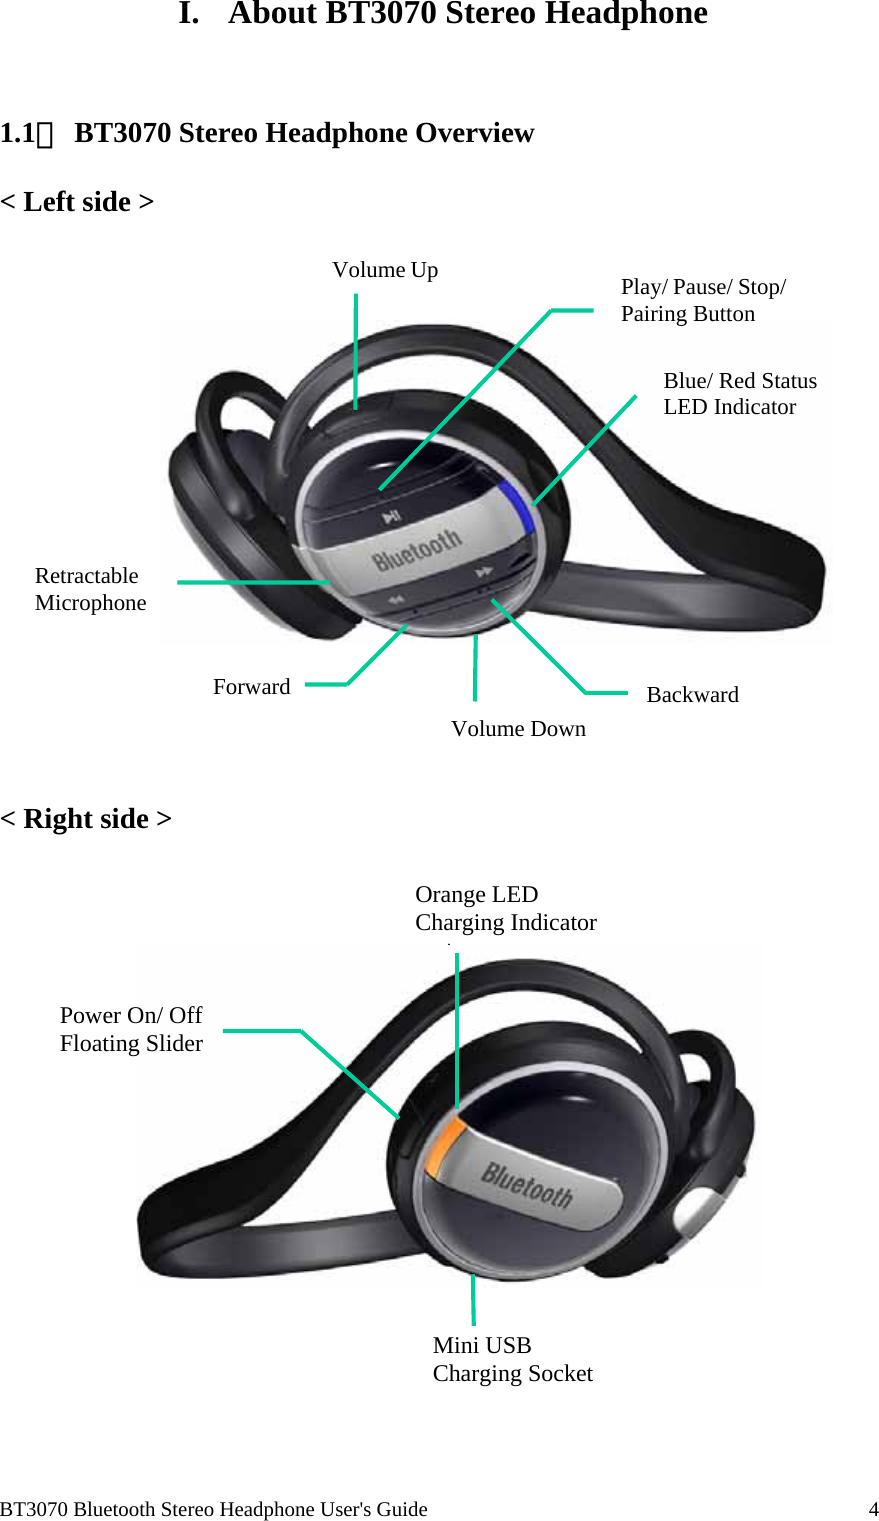  BT3070 Bluetooth Stereo Headphone User&apos;s Guide                                                                                    4 I.  About BT3070 Stereo Headphone    1.1、 BT3070 Stereo Headphone Overview  &lt; Left side &gt;    &lt; Right side &gt;     Blue/ Red Status LED Indicator Volume Up Play/ Pause/ Stop/Pairing Button Volume DownForward  Backward Retractable Microphone Orange LED Charging IndicatorPower On/ Off Floating Slider Mini USB Charging Socket